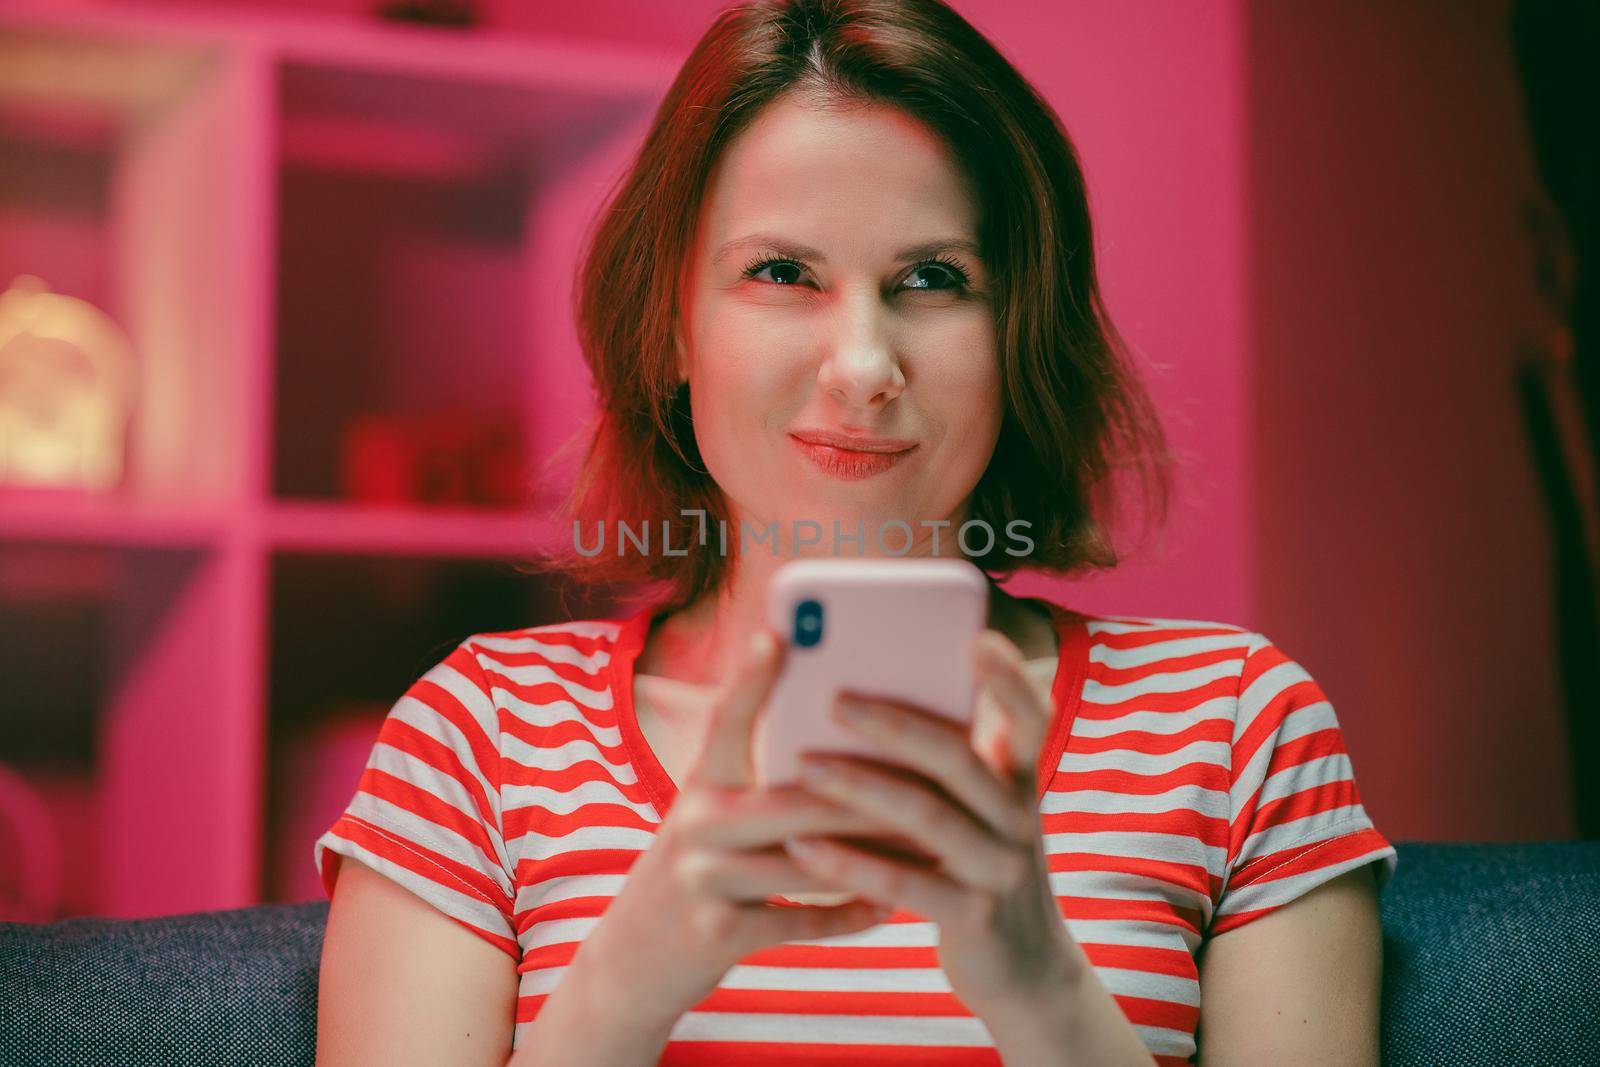 Young Woman Holding Smart Phone Looking at Cellphone Screen Laughing Enjoying Using Mobile Apps for Shopping Having Fun Playing Games Chatting in Social Media Sit on Couch at Home by uflypro